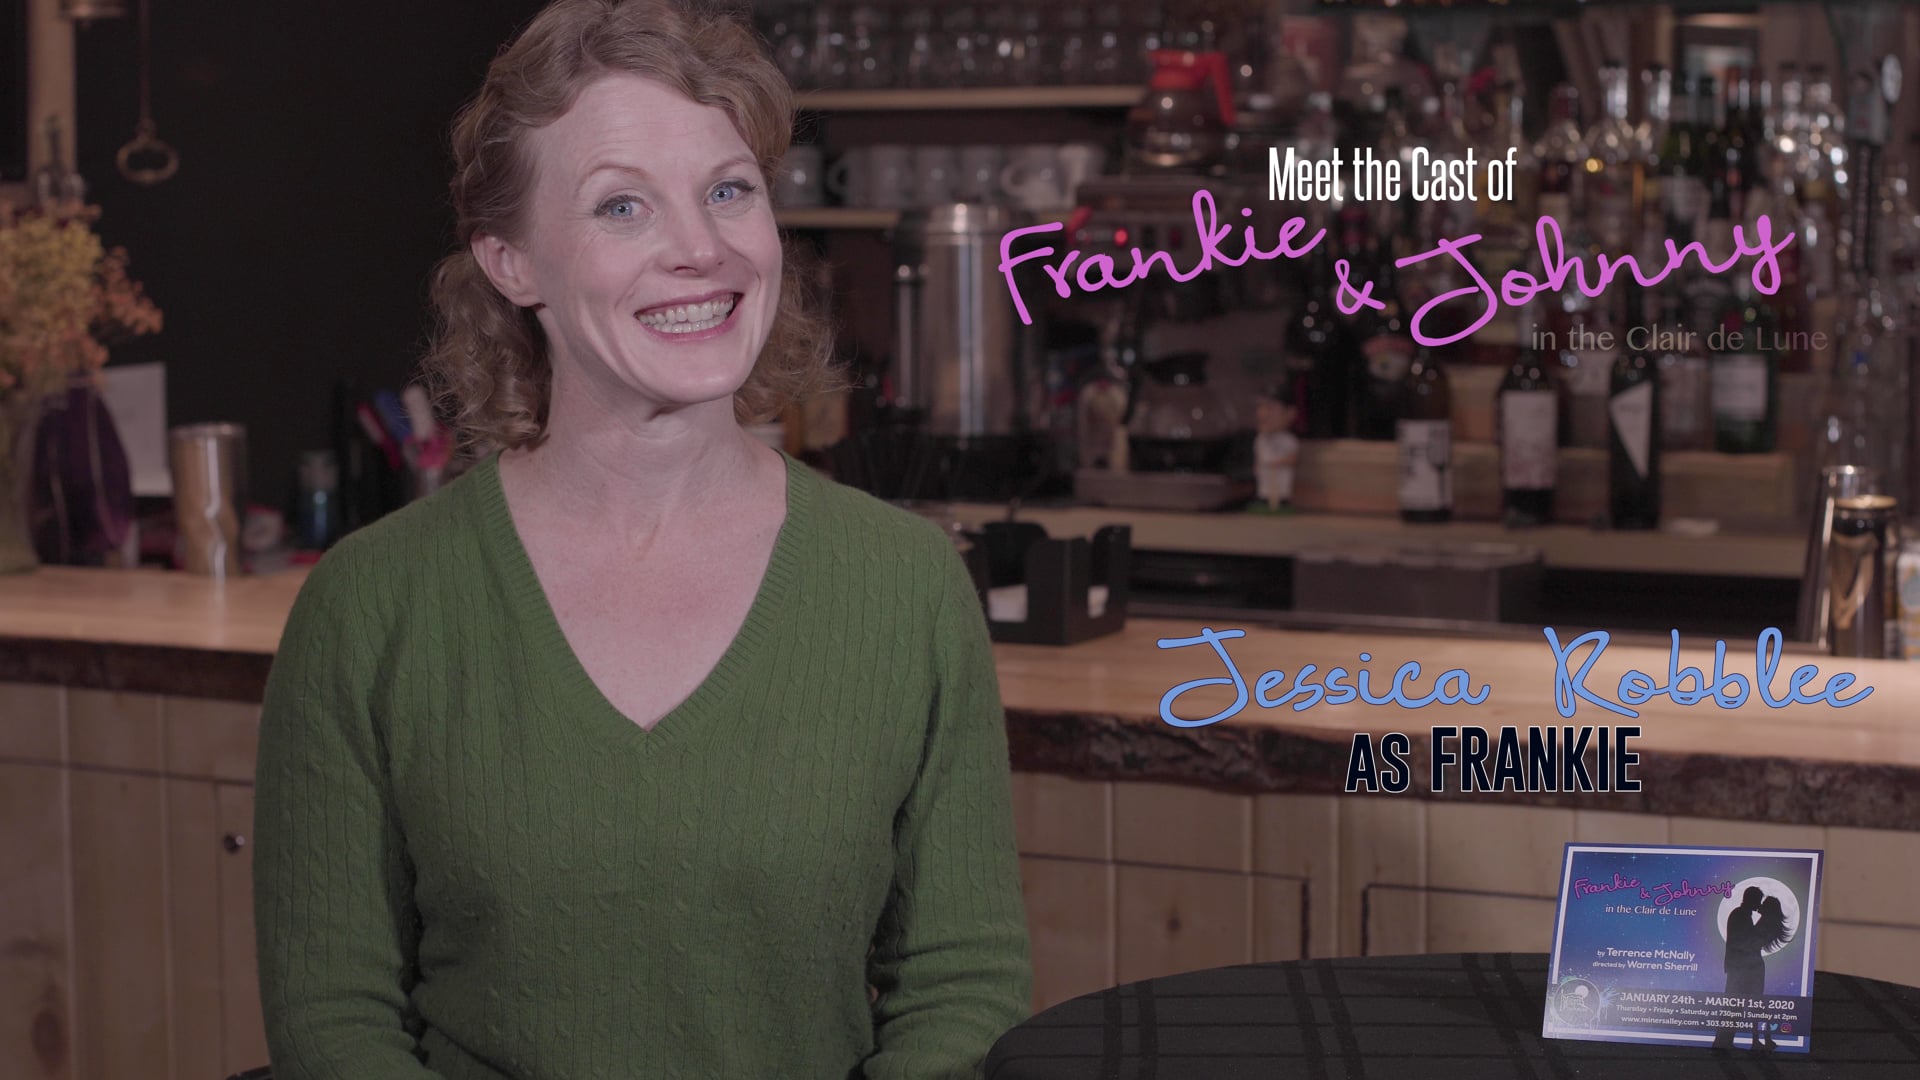 Meet the Cast of "Frankie & Johnny in the Clair de Lune" (Jessica Robblee as Frankie)